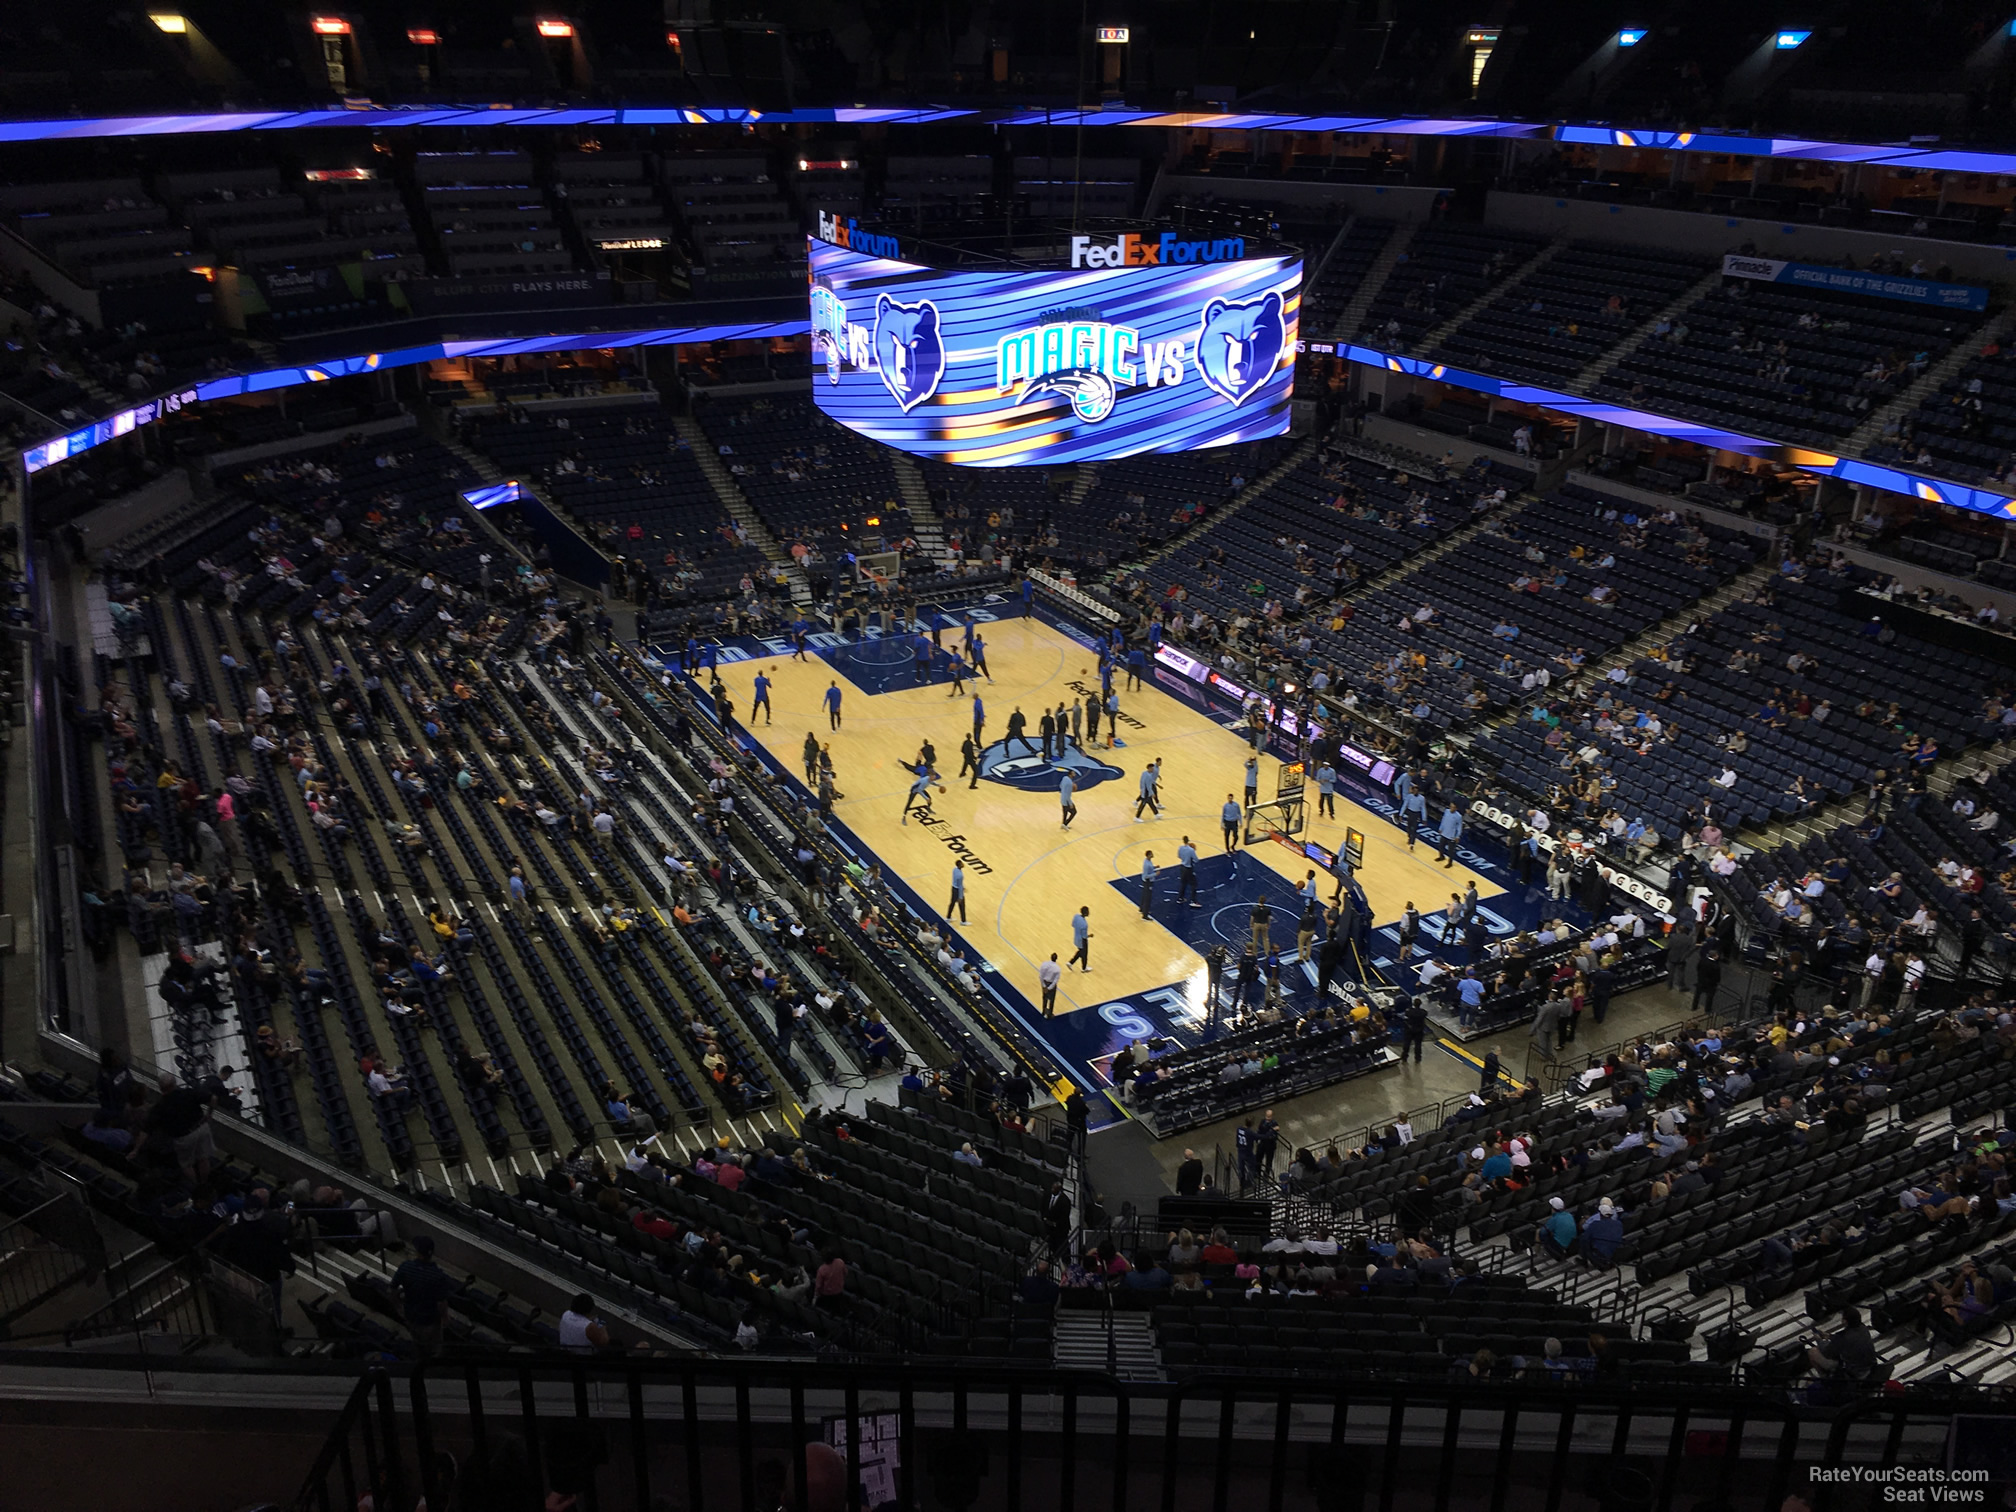 section 230, row f seat view  for basketball - fedex forum